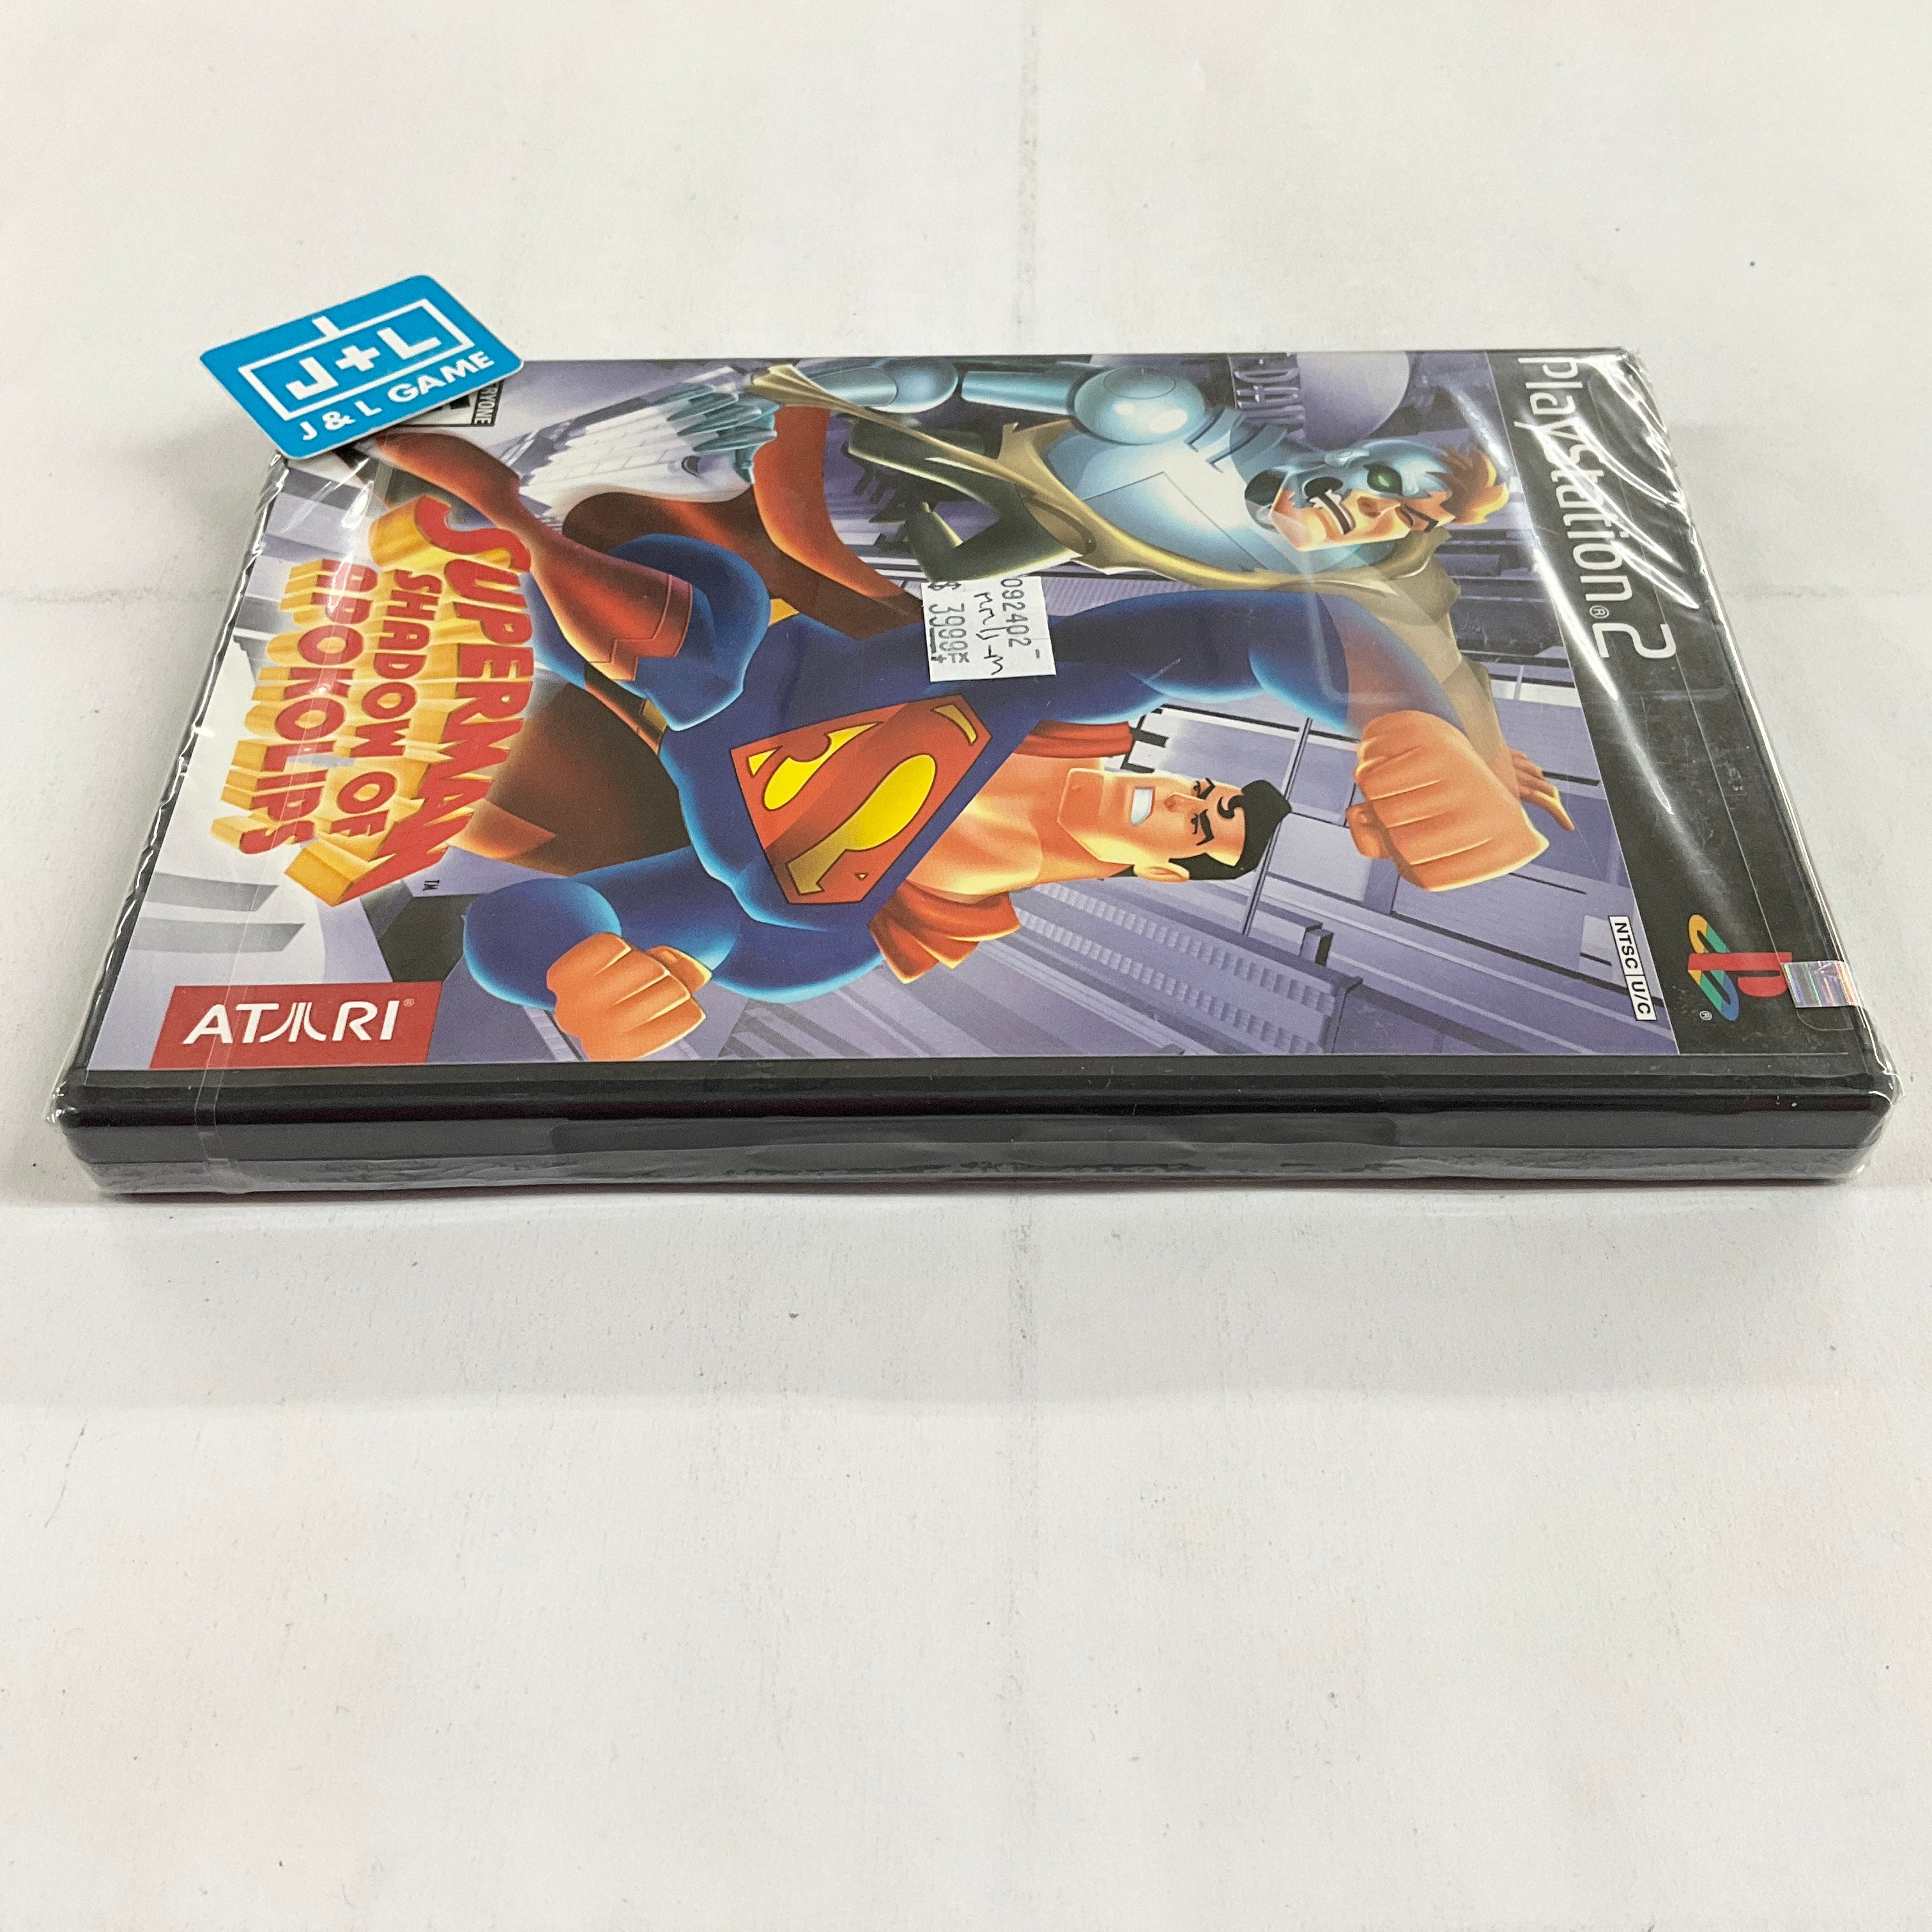 Superman: Shadow of Apokolips - (PS2) PlayStation 2 Video Games Infogrames   